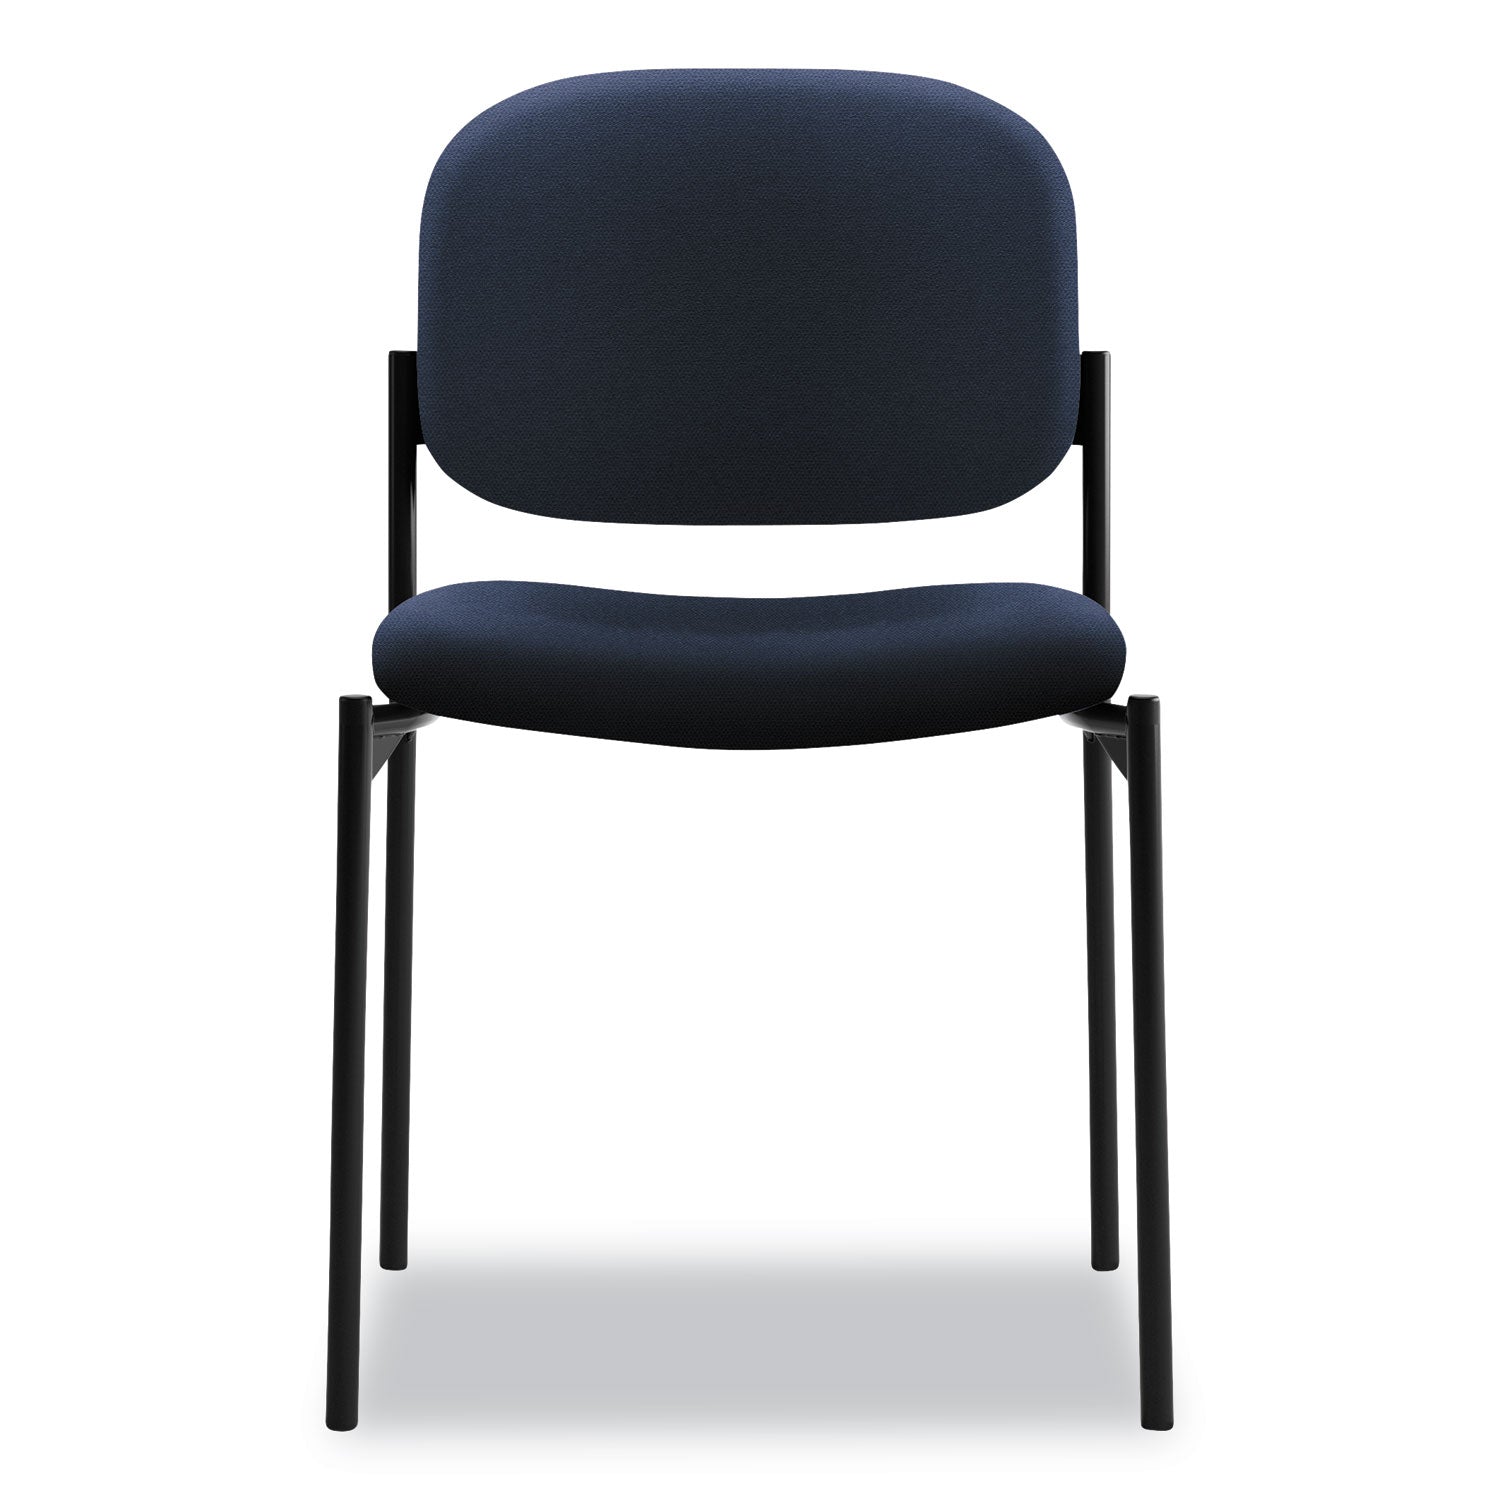 VL606 Stacking Guest Chair without Arms, Fabric Upholstery, 21.25" x 21" x 32.75", Navy Seat, Navy Back, Black Base - 